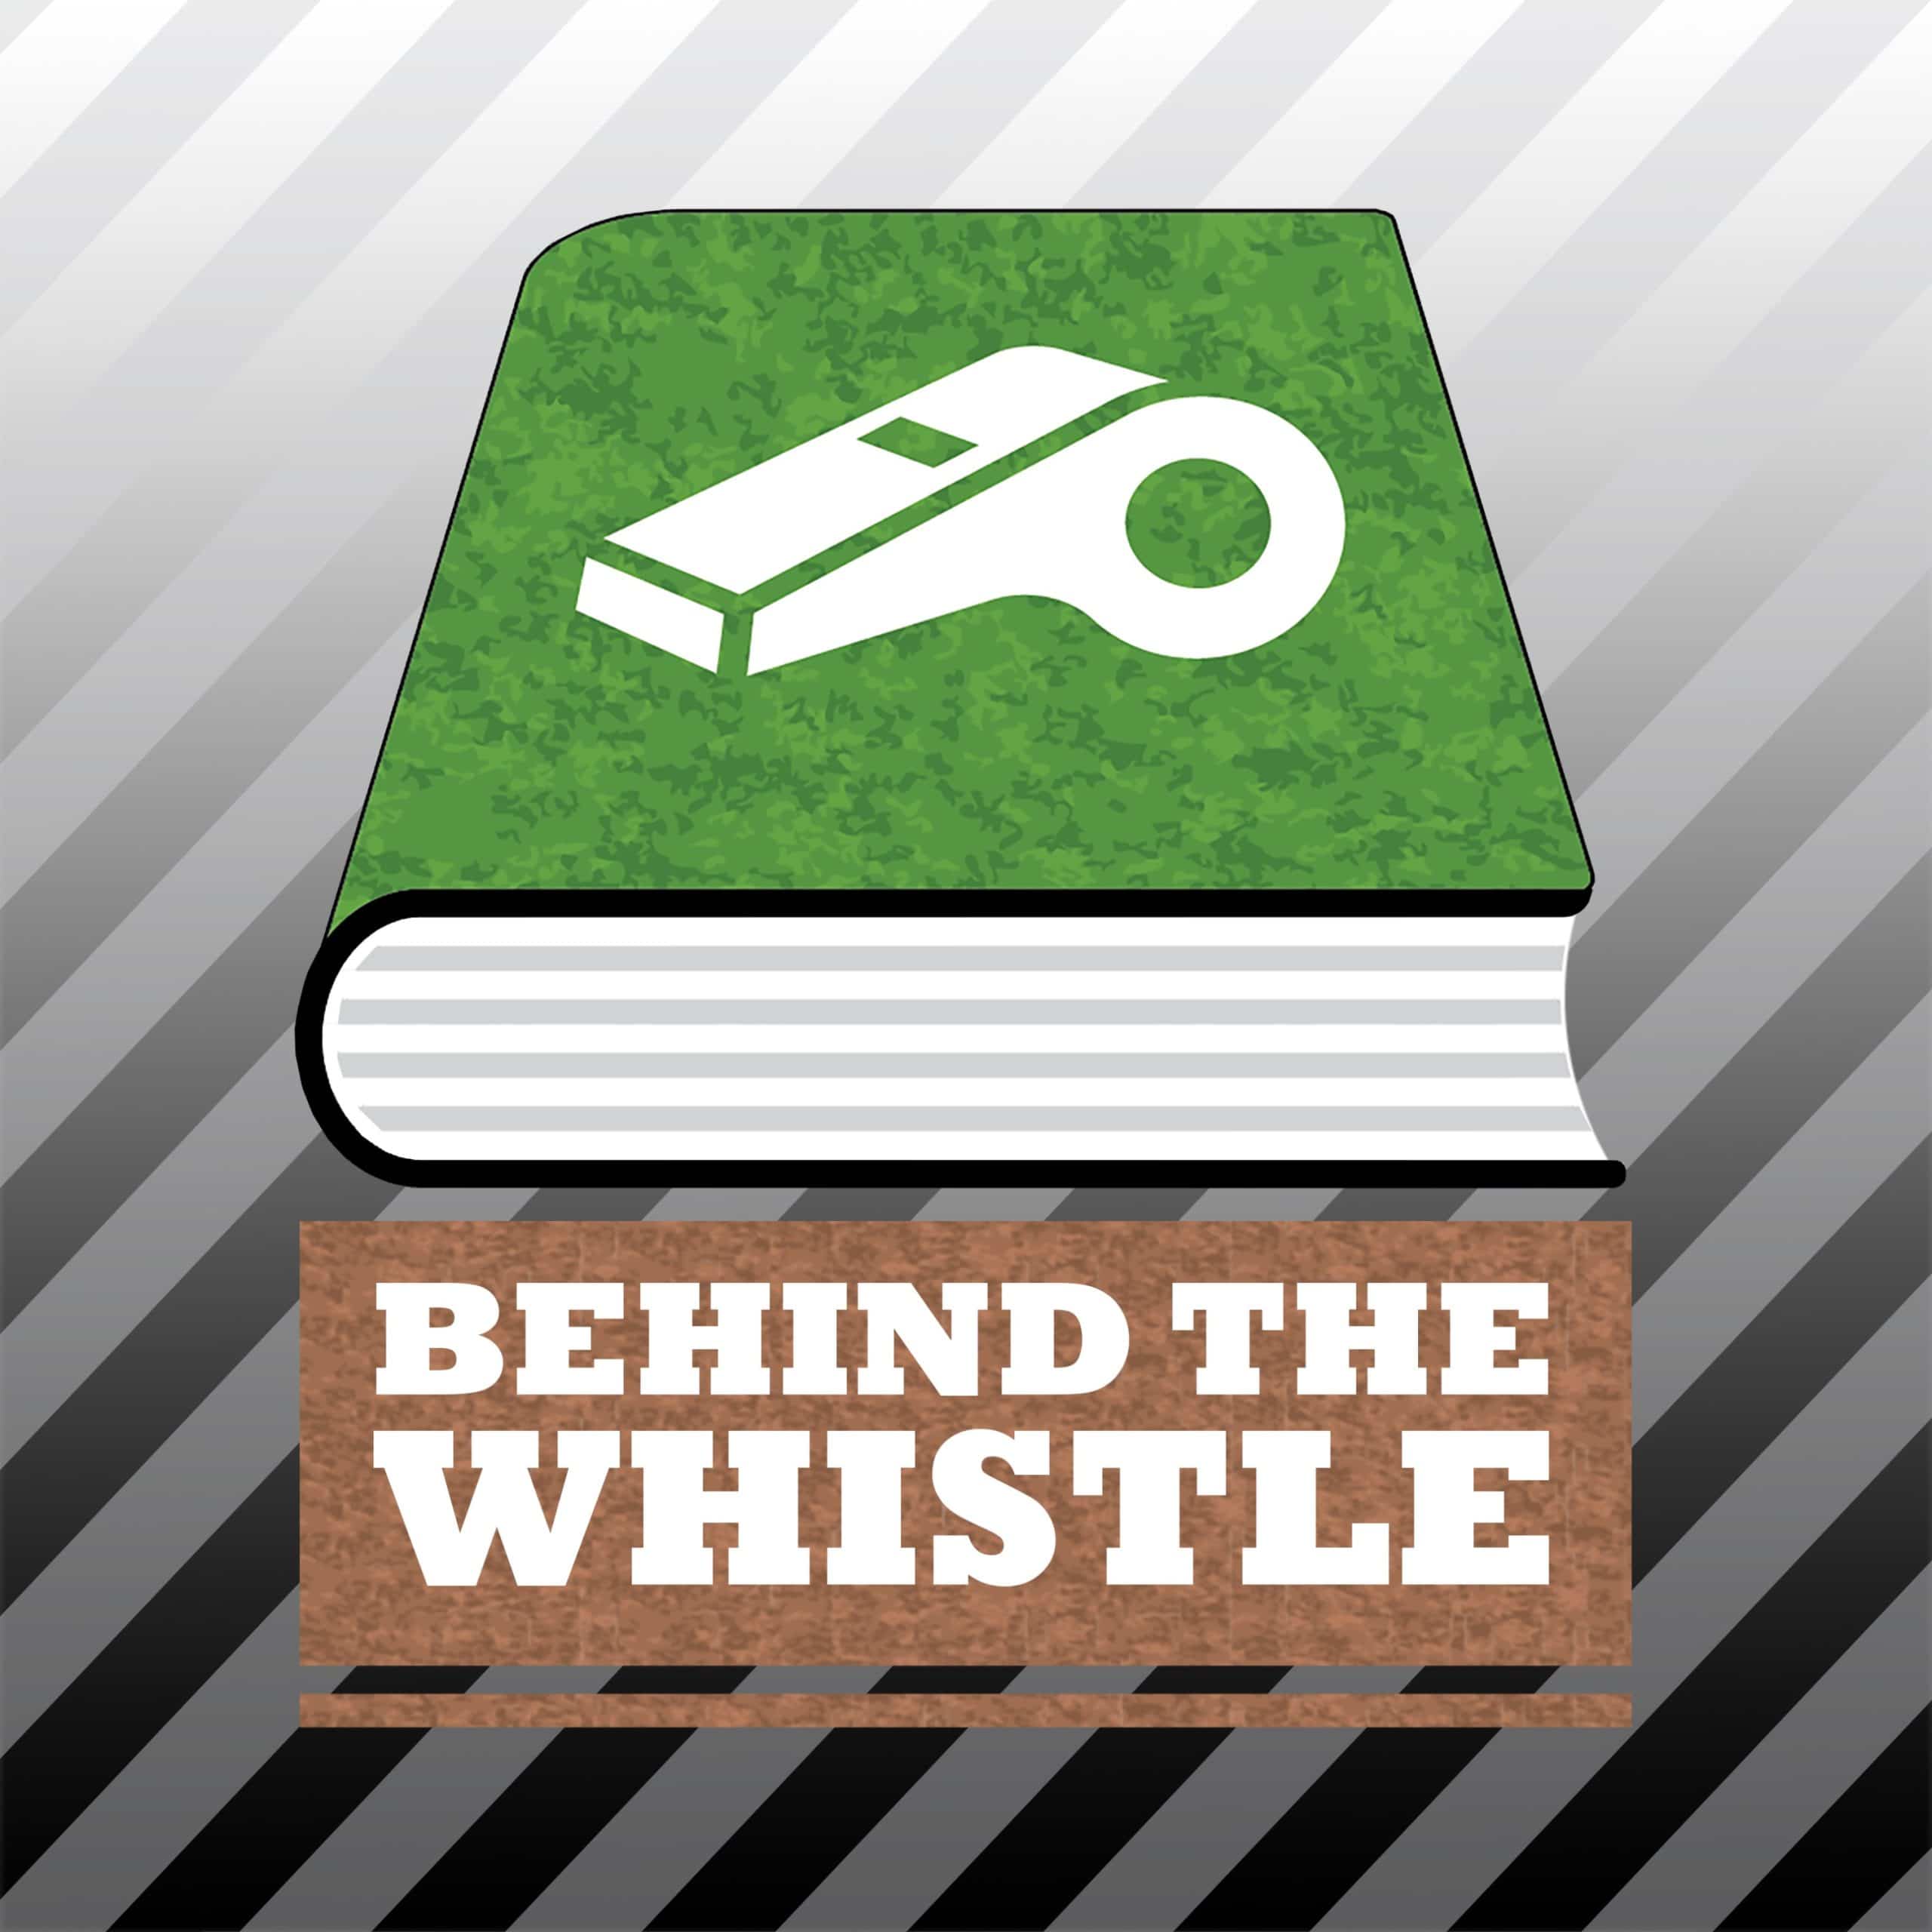 Behind the Whistle